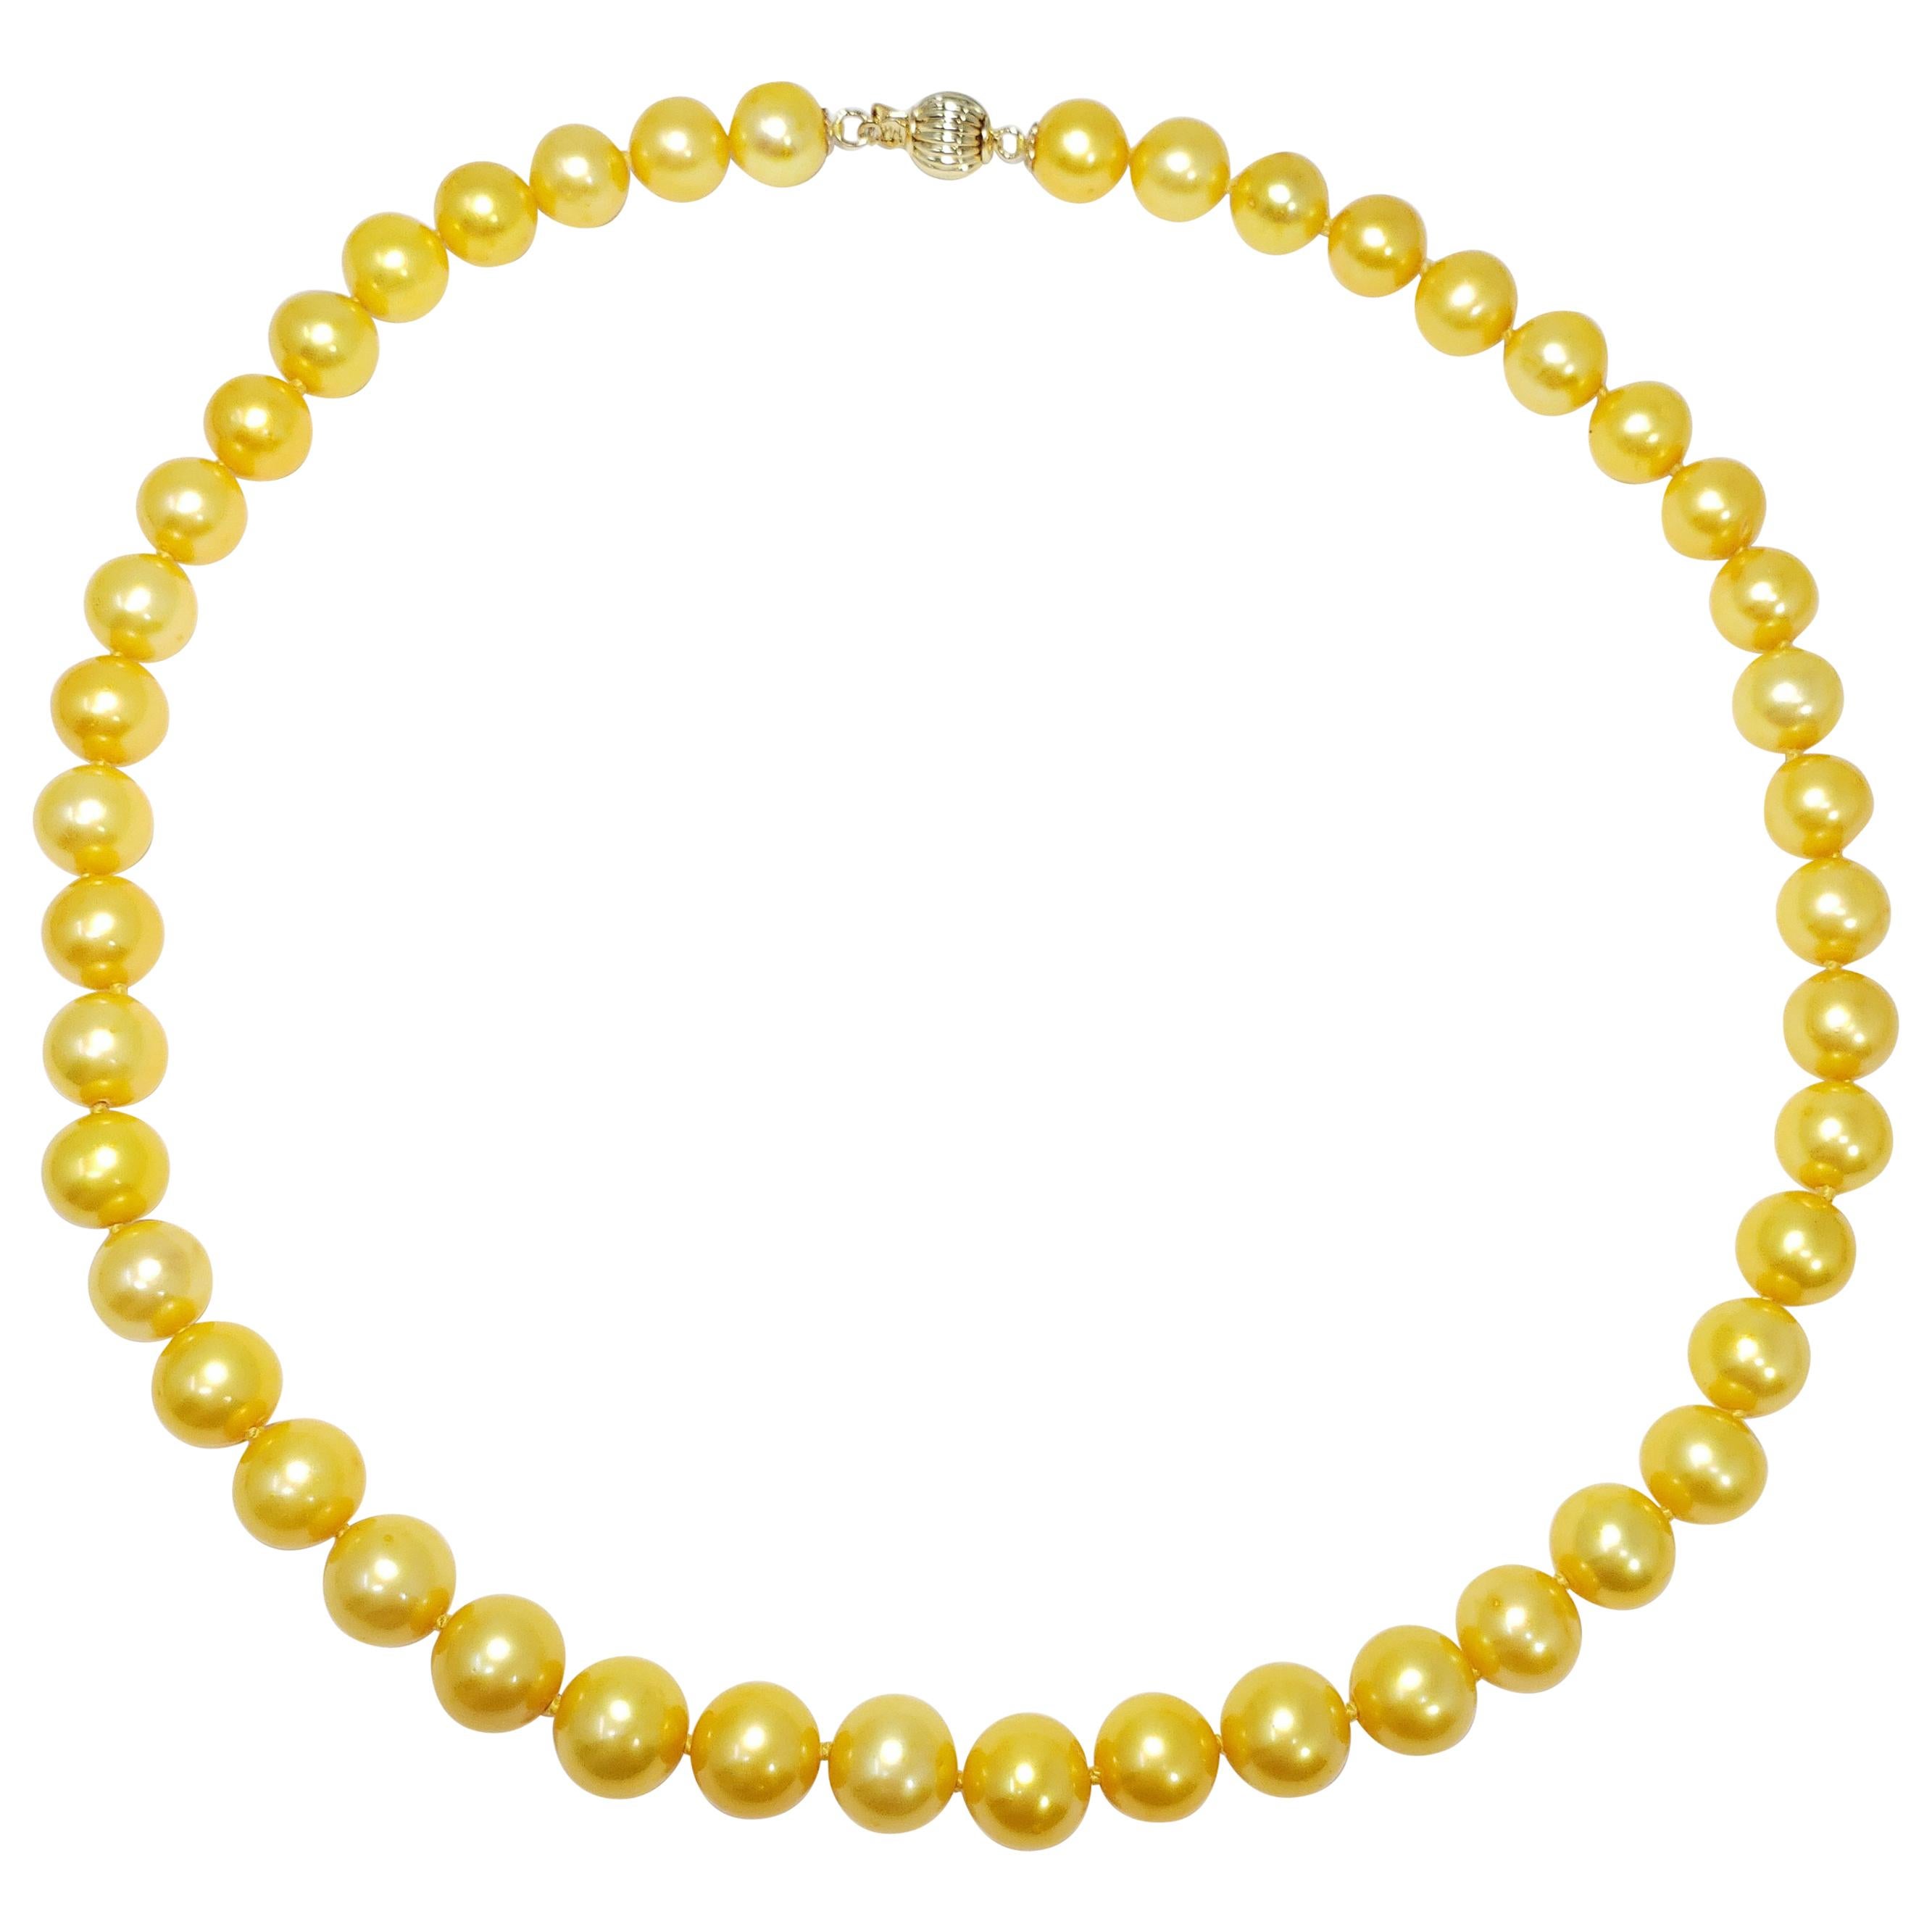 South Sea Pearl Knotted String Necklace with 14 Karat Yellow Gold Clasp